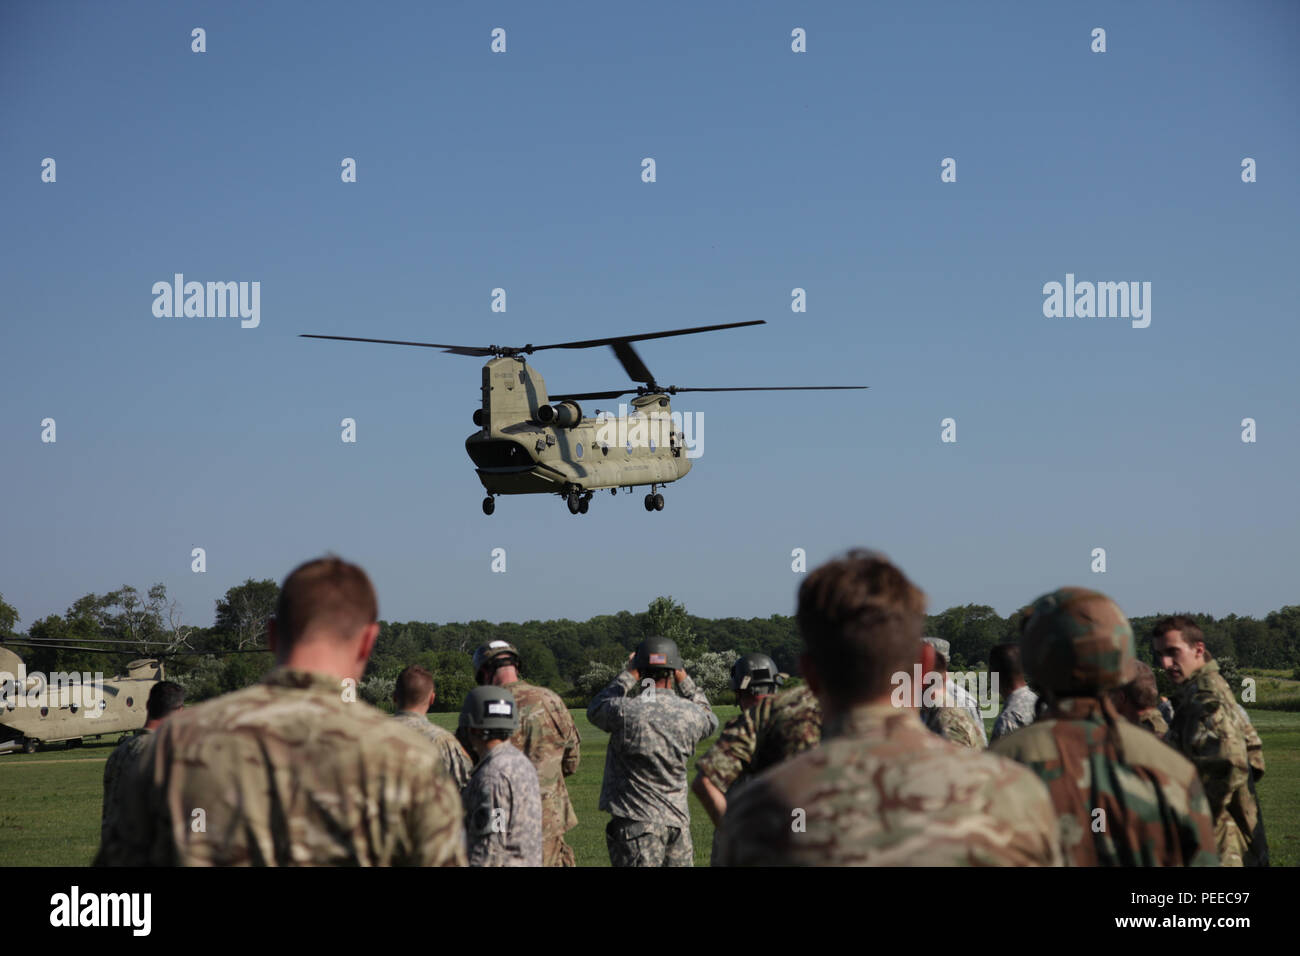 Paratroopers watch a CH-47 Chinook land prior to a wing exchange jump at Leapfest in West Kingston, R.I., Aug. 3, 2015. Leapfest is an International parachute competition hosted by the 56th Troop Command, Rhode Island National Guard to promote high level technical training and esprit de corps within the International Airborne community. (U.S. Army Photo by Spc. Josephine Carlson/Released) Stock Photo